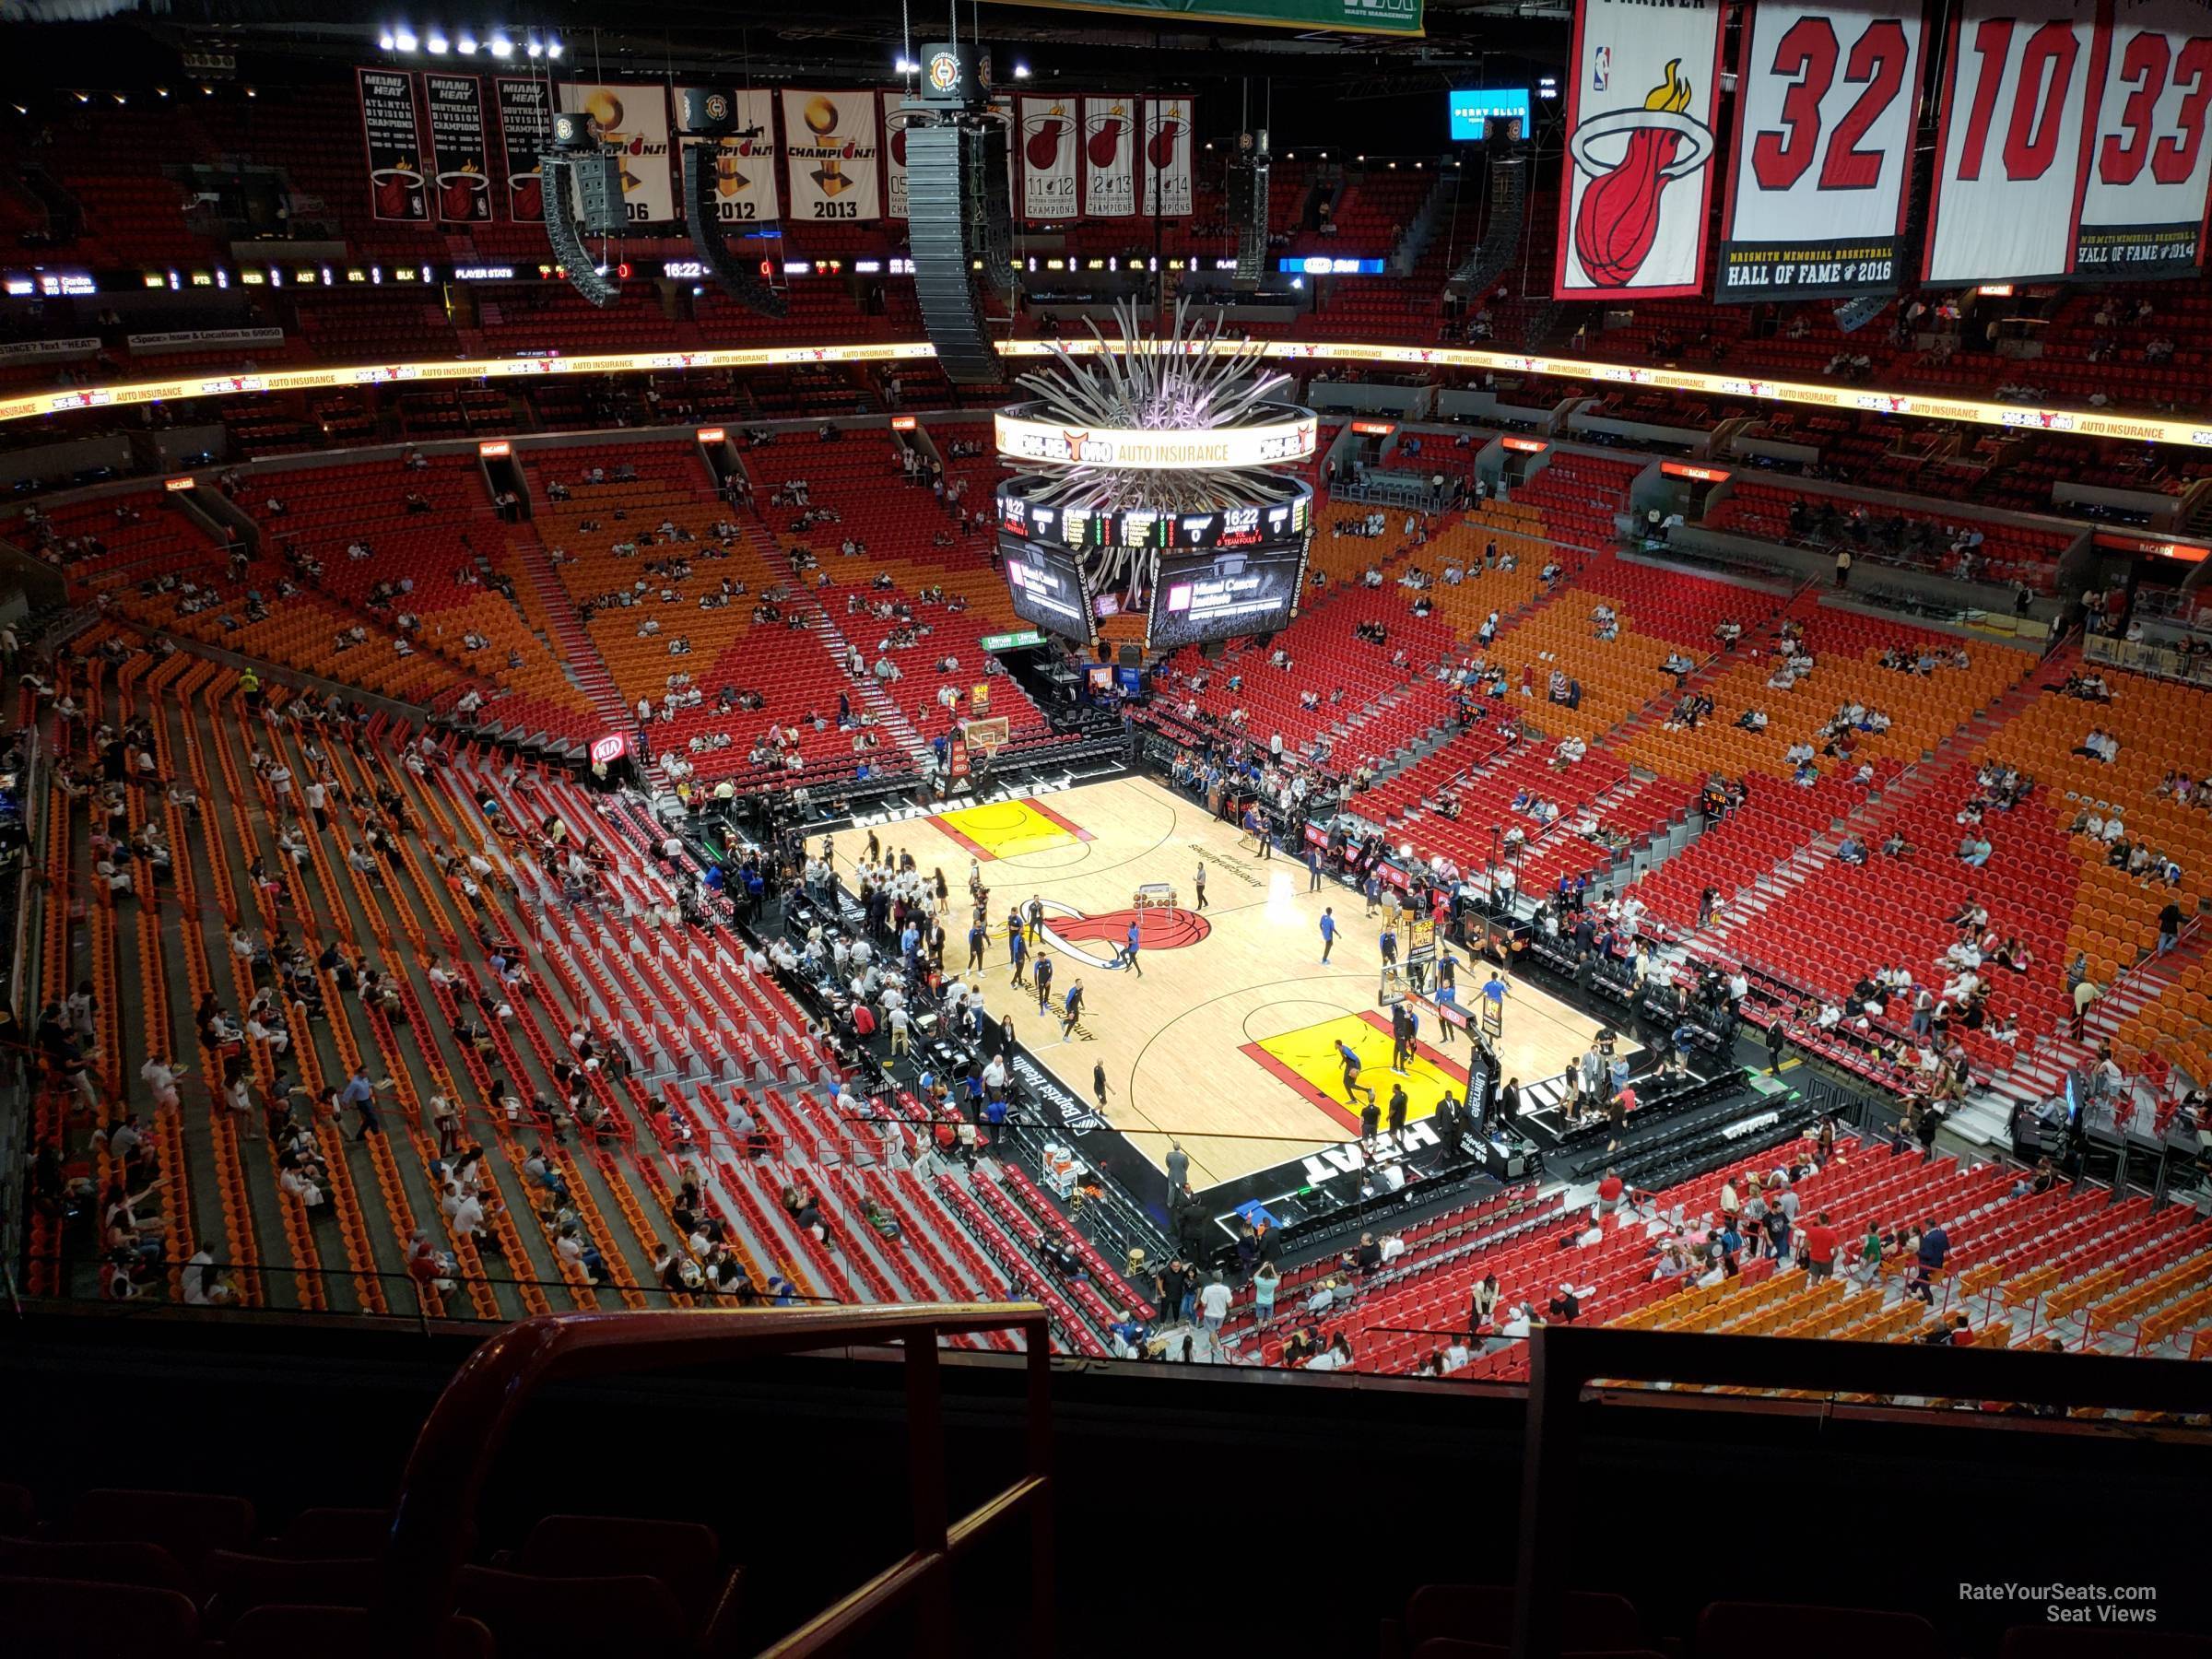 section 409, row 6 seat view  for basketball - kaseya center